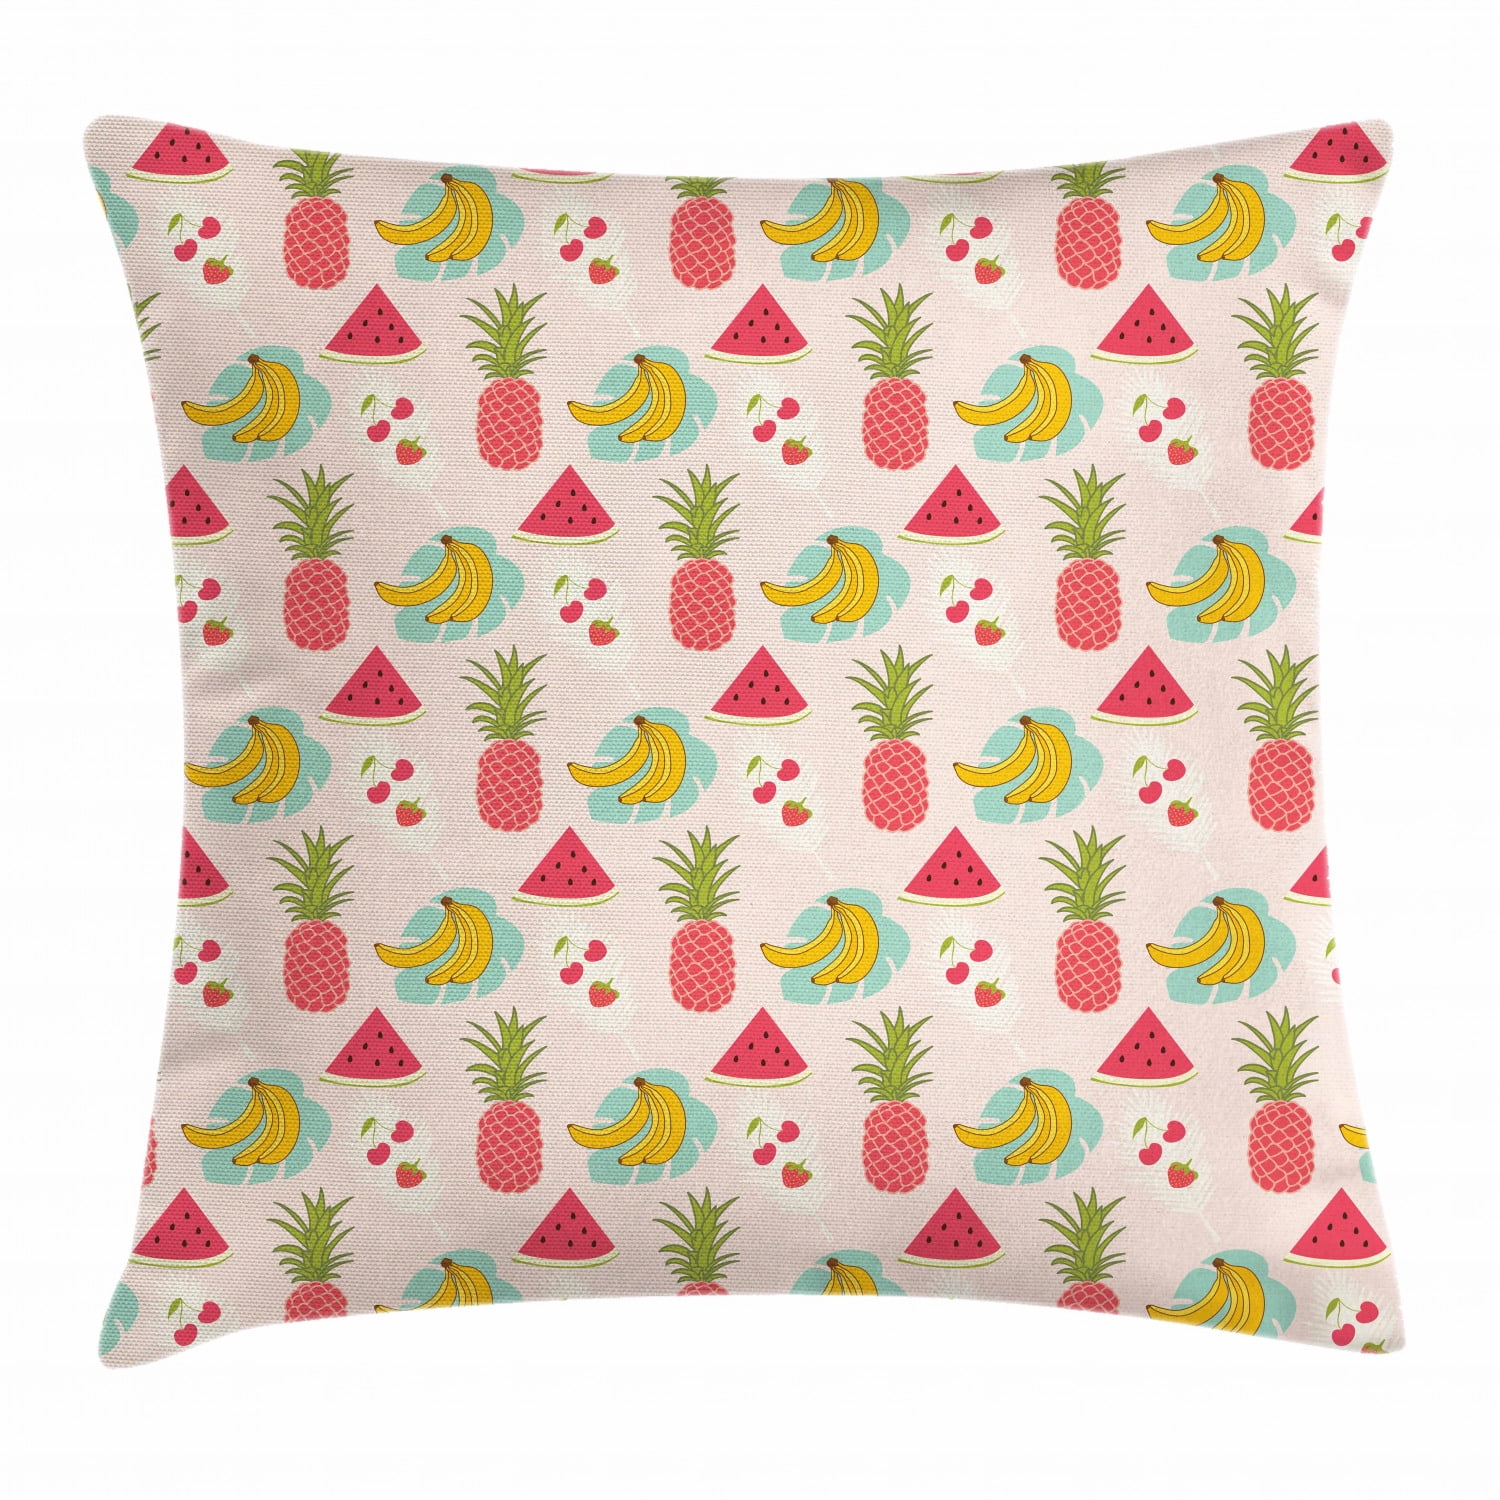 18" Summer Tropical Pineapple Decorative Pillow Covers Fruit Square Cushion Case 